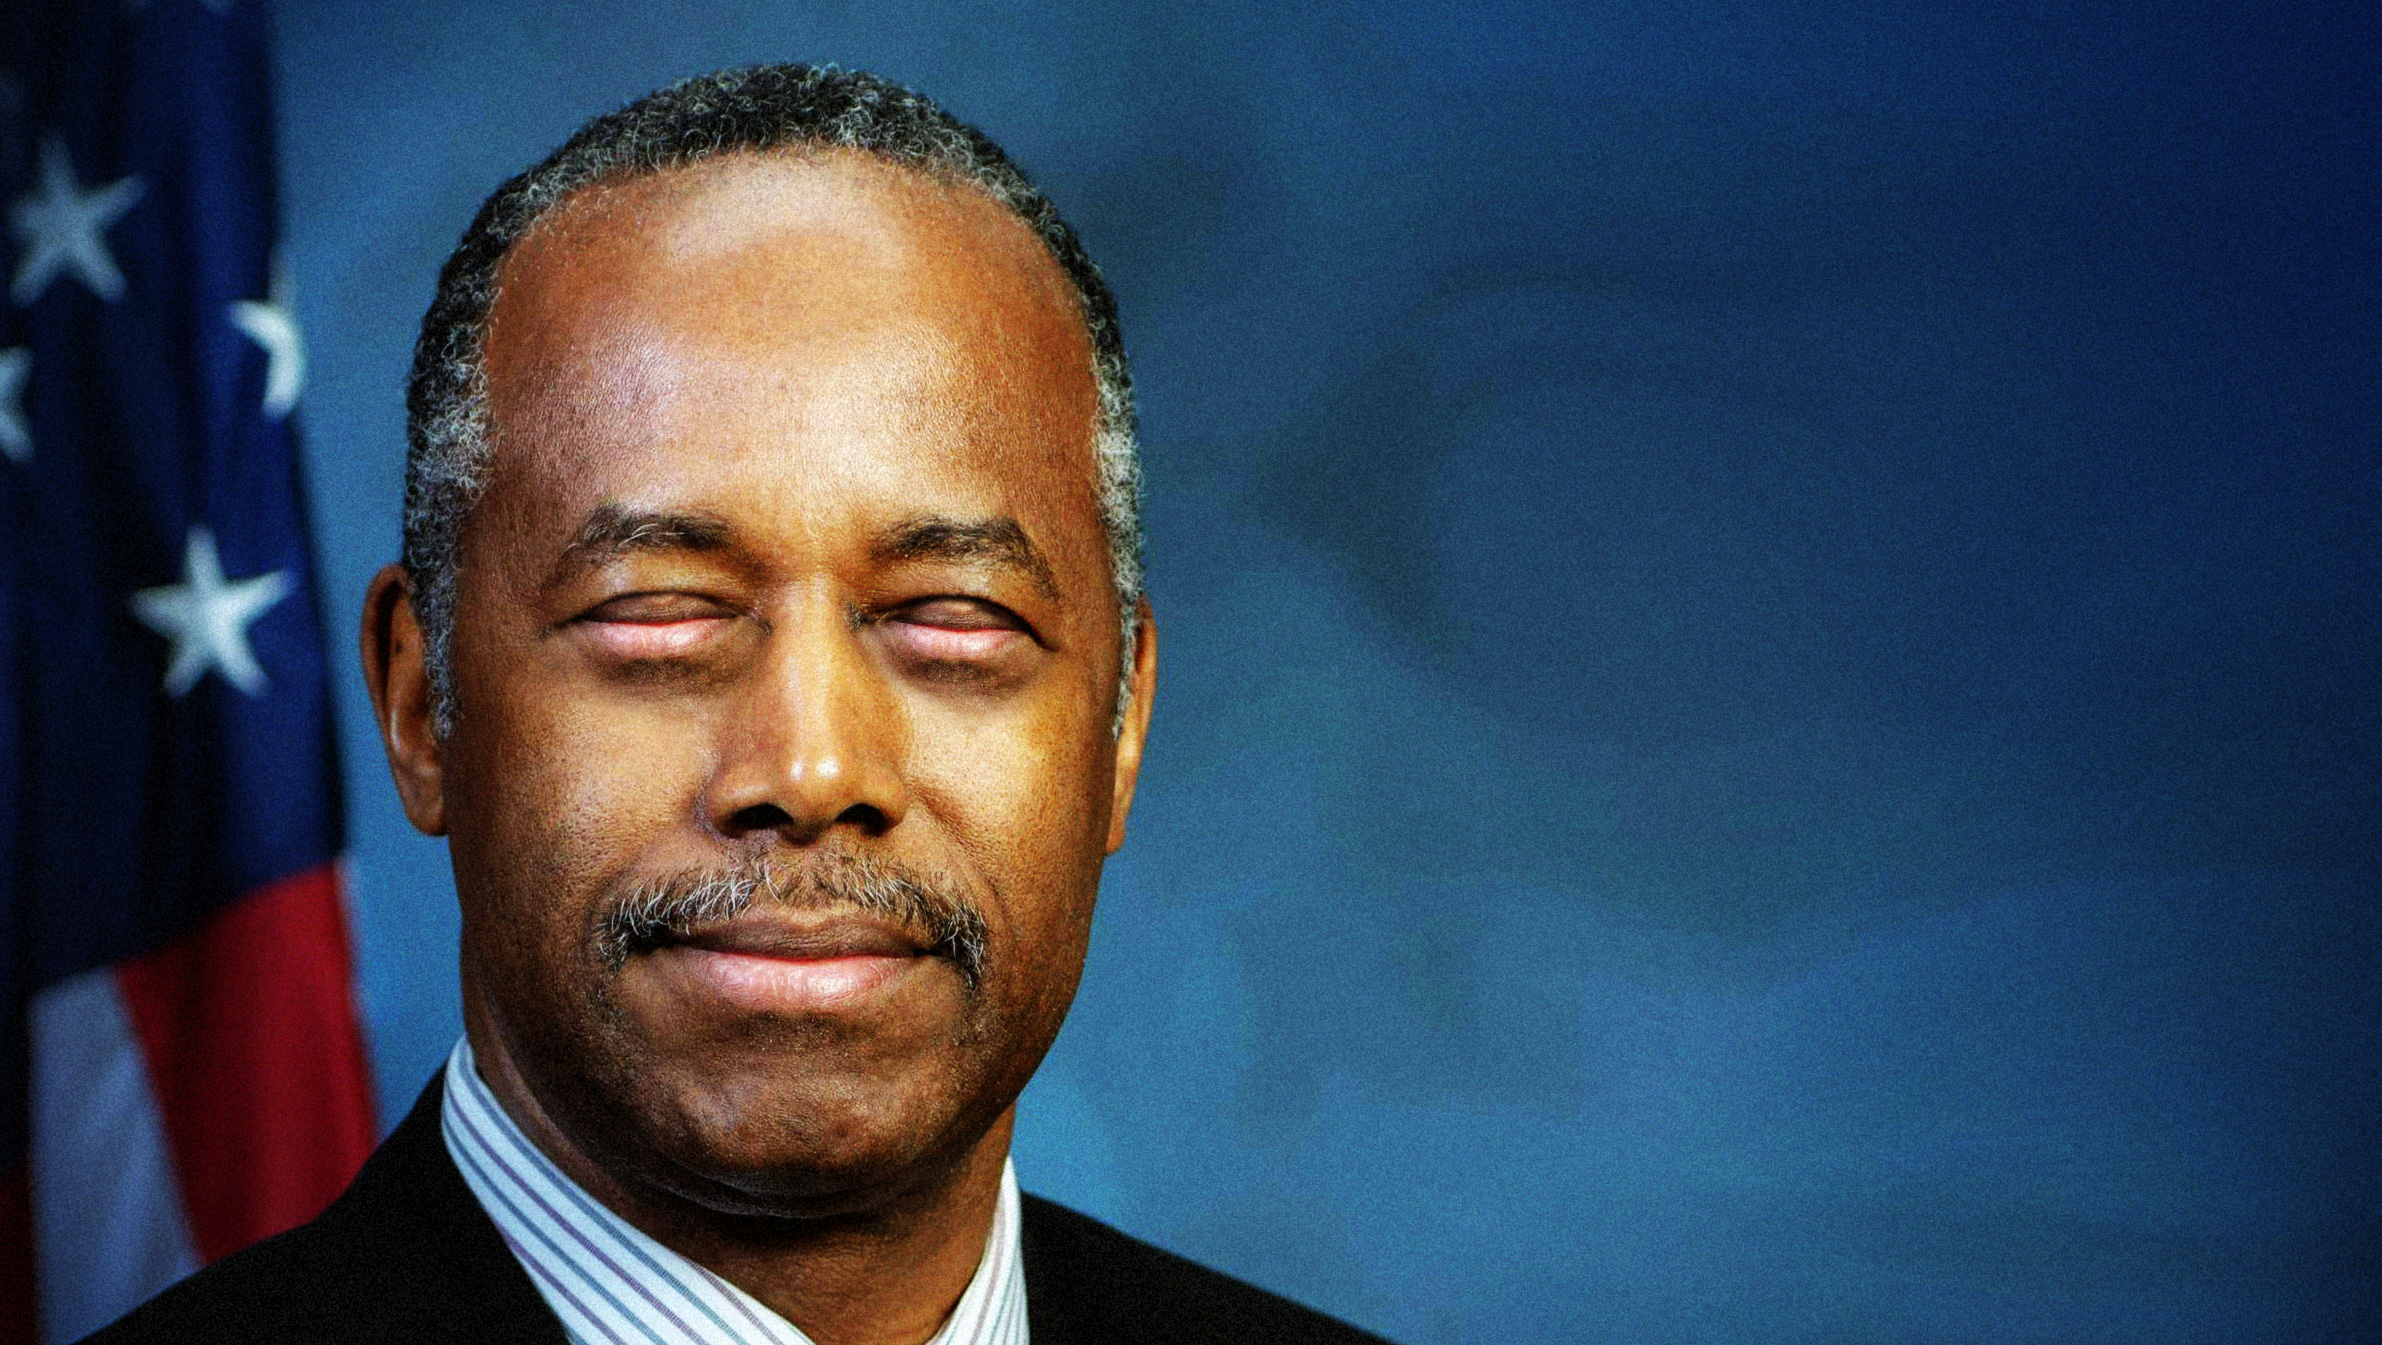 For Real? Ben Carson Says 'Poverty Is A State Mind'